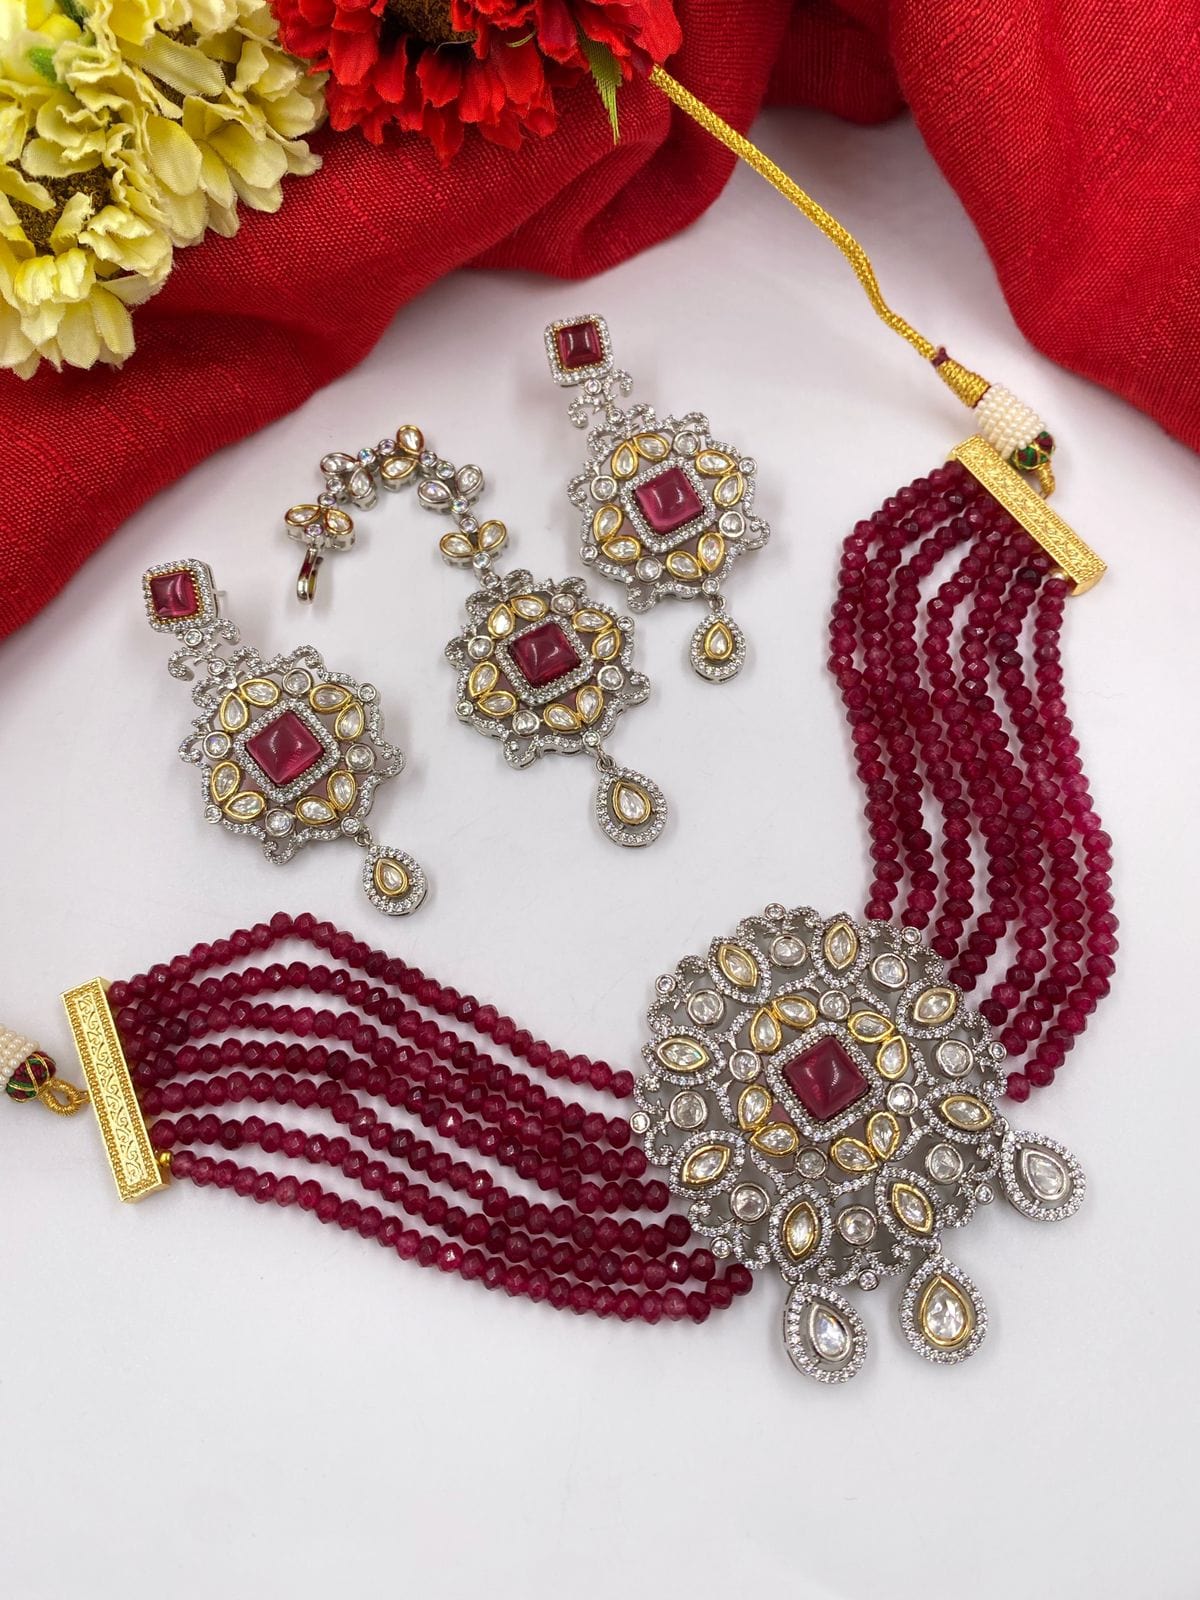 Red AD Choker Necklace Set With Maang Tikka For Weddings By Gehna Shop Victorian Necklace Sets